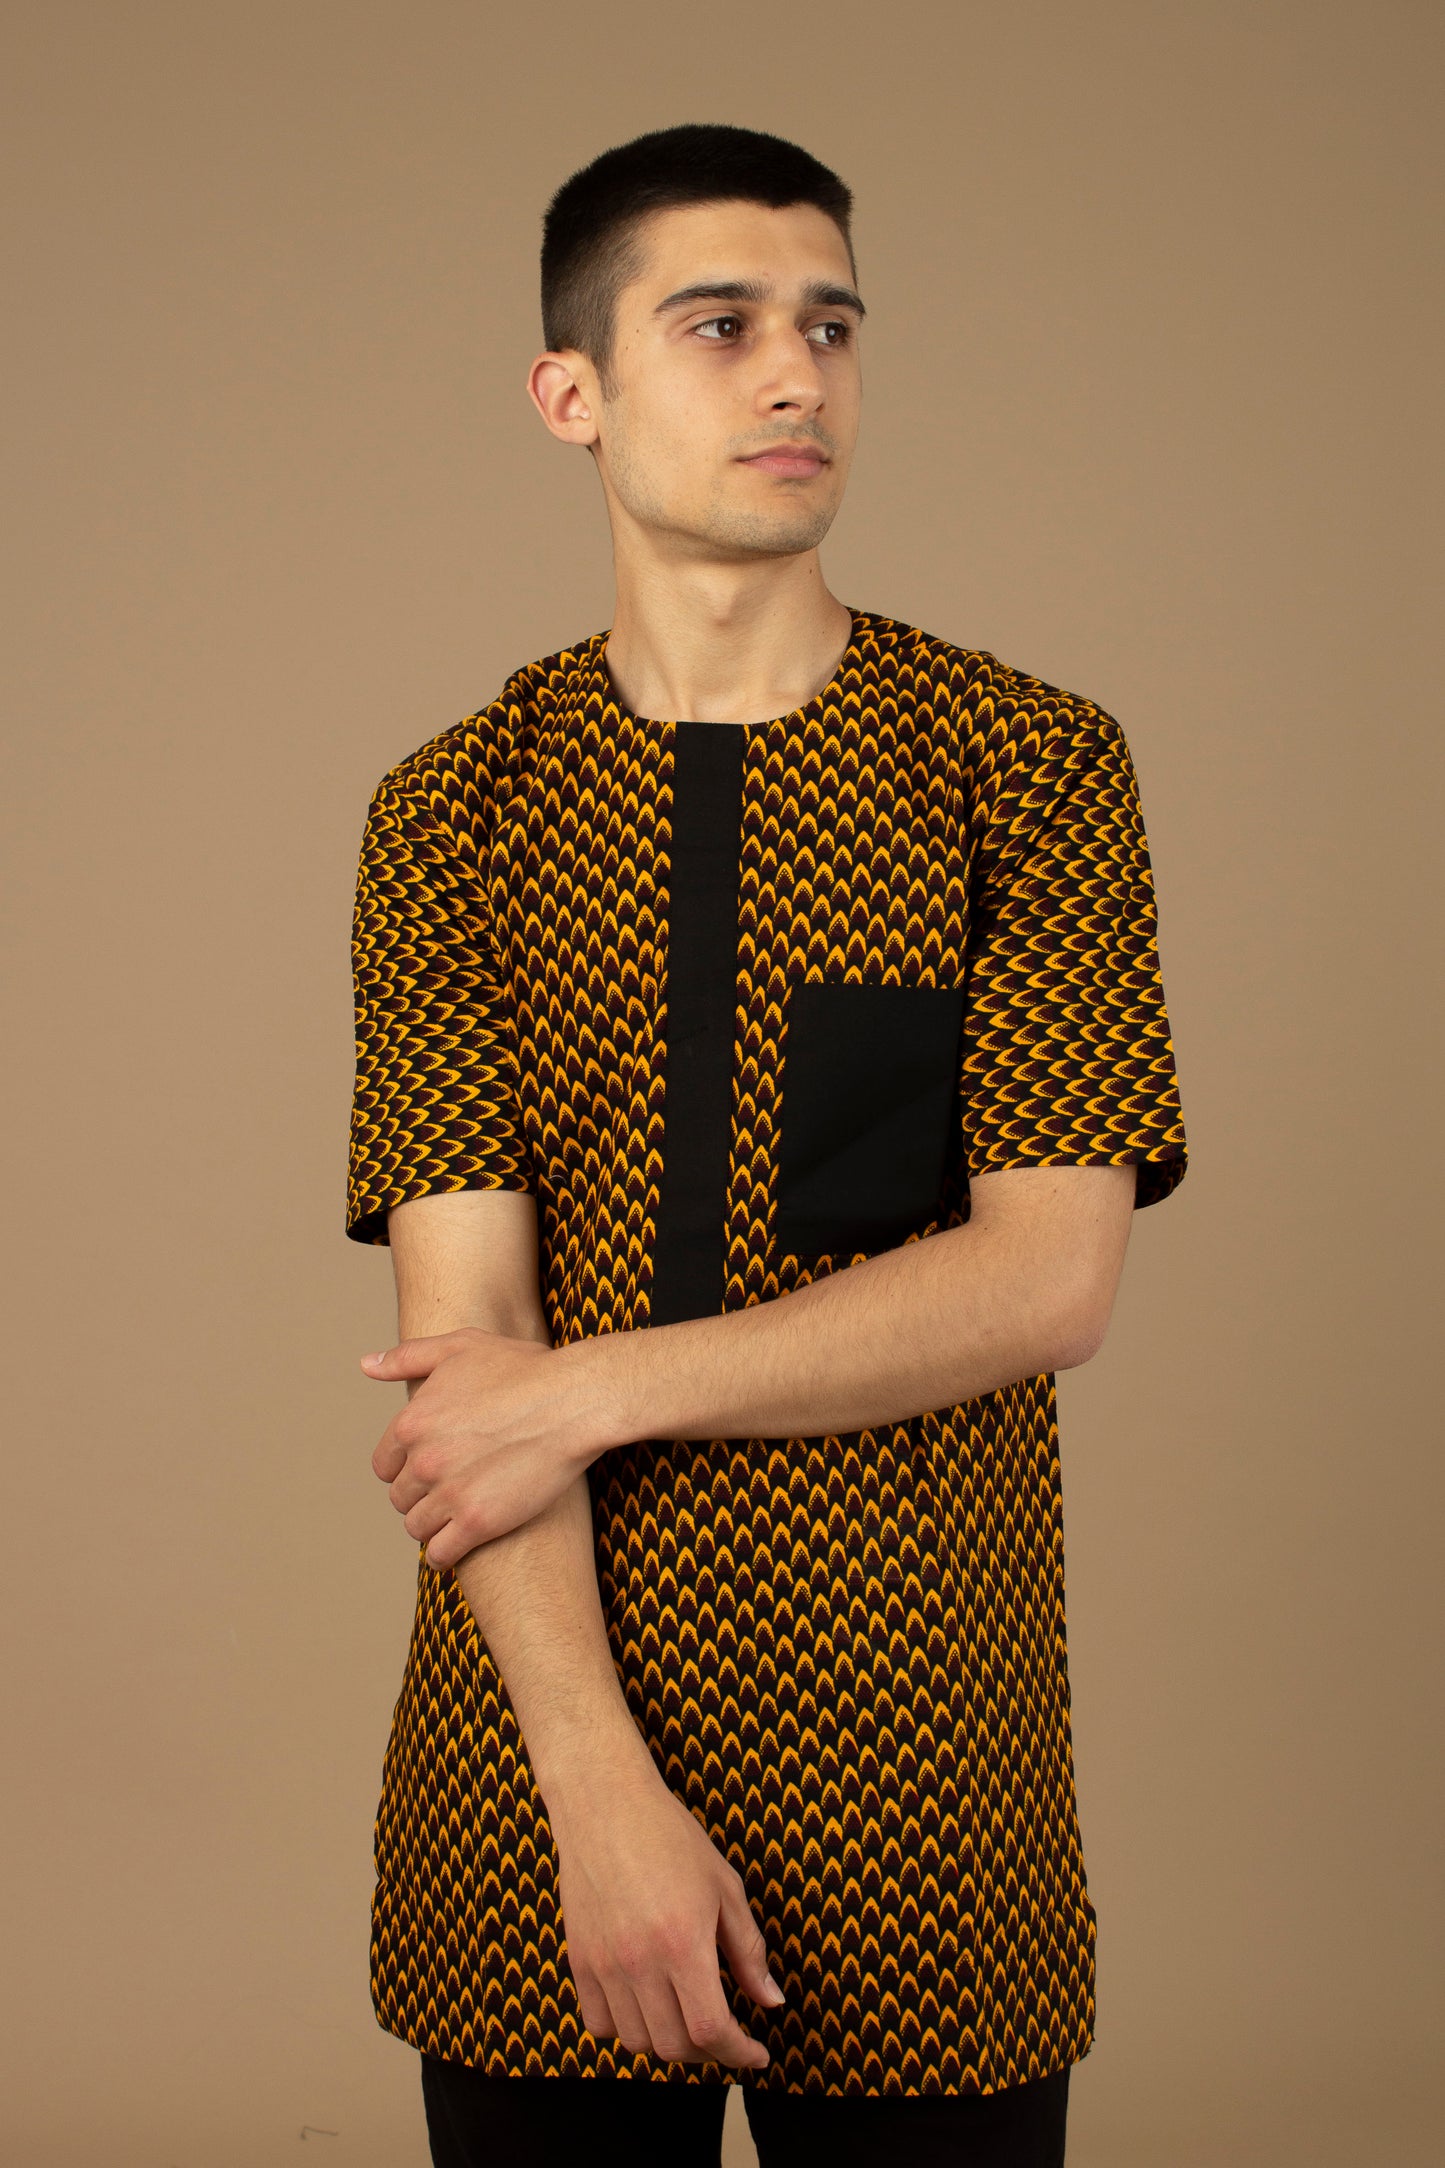 Vero African Print Kaftan Top is an ethically printed Matte Black Trimmed, Wax printed body style men's Kaftan top made from sustainably selected Cotton Ankara wax print in a repeated geometric brown and yellow African print pattern. Designed in England Made in Nigeria.